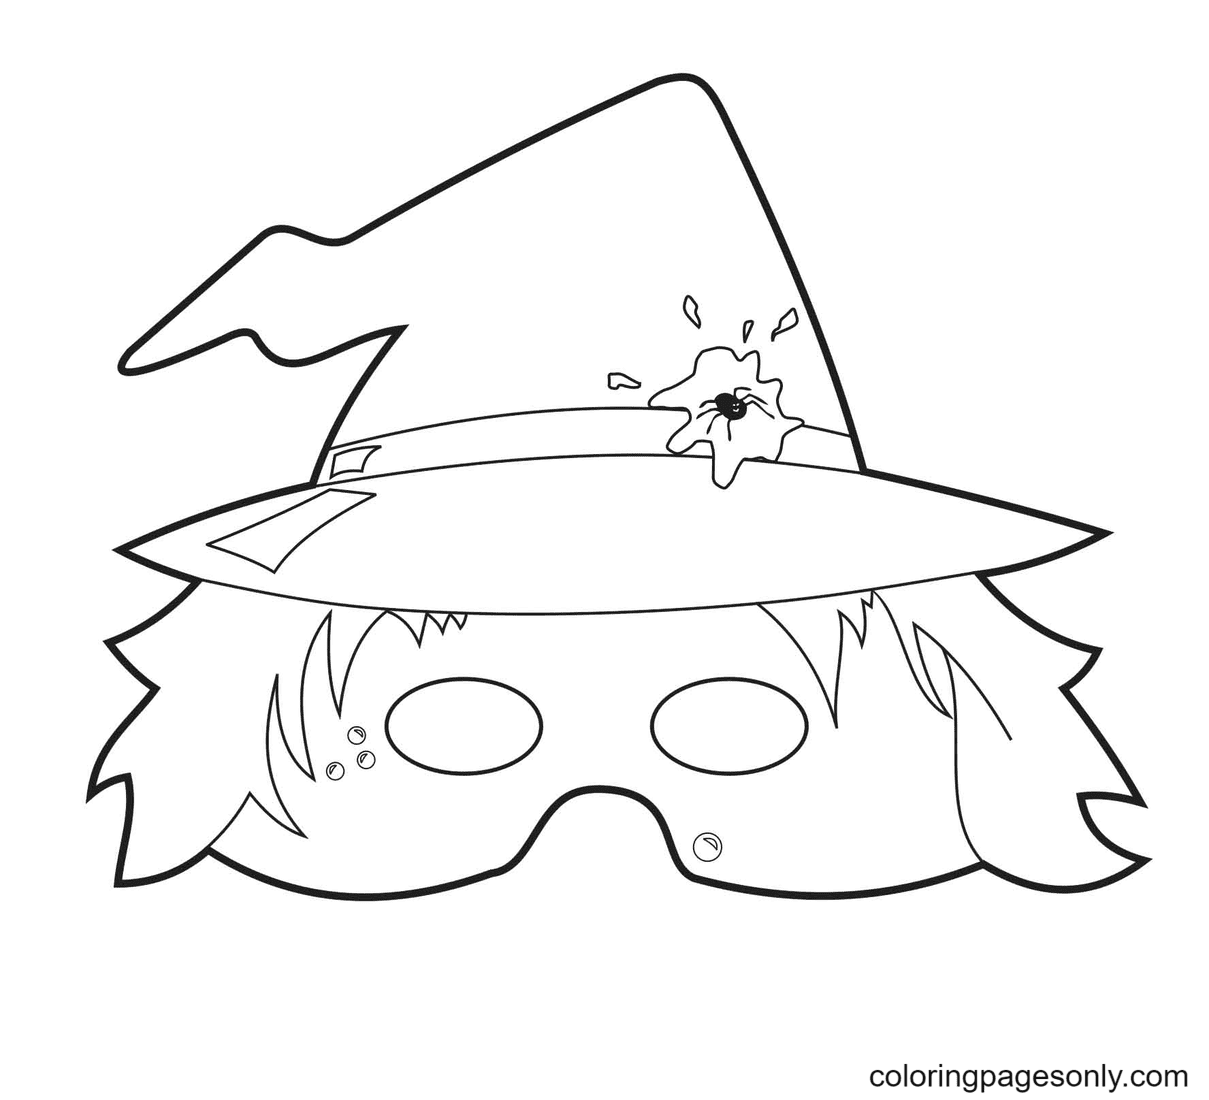 Halloween masks coloring pages printable for free download